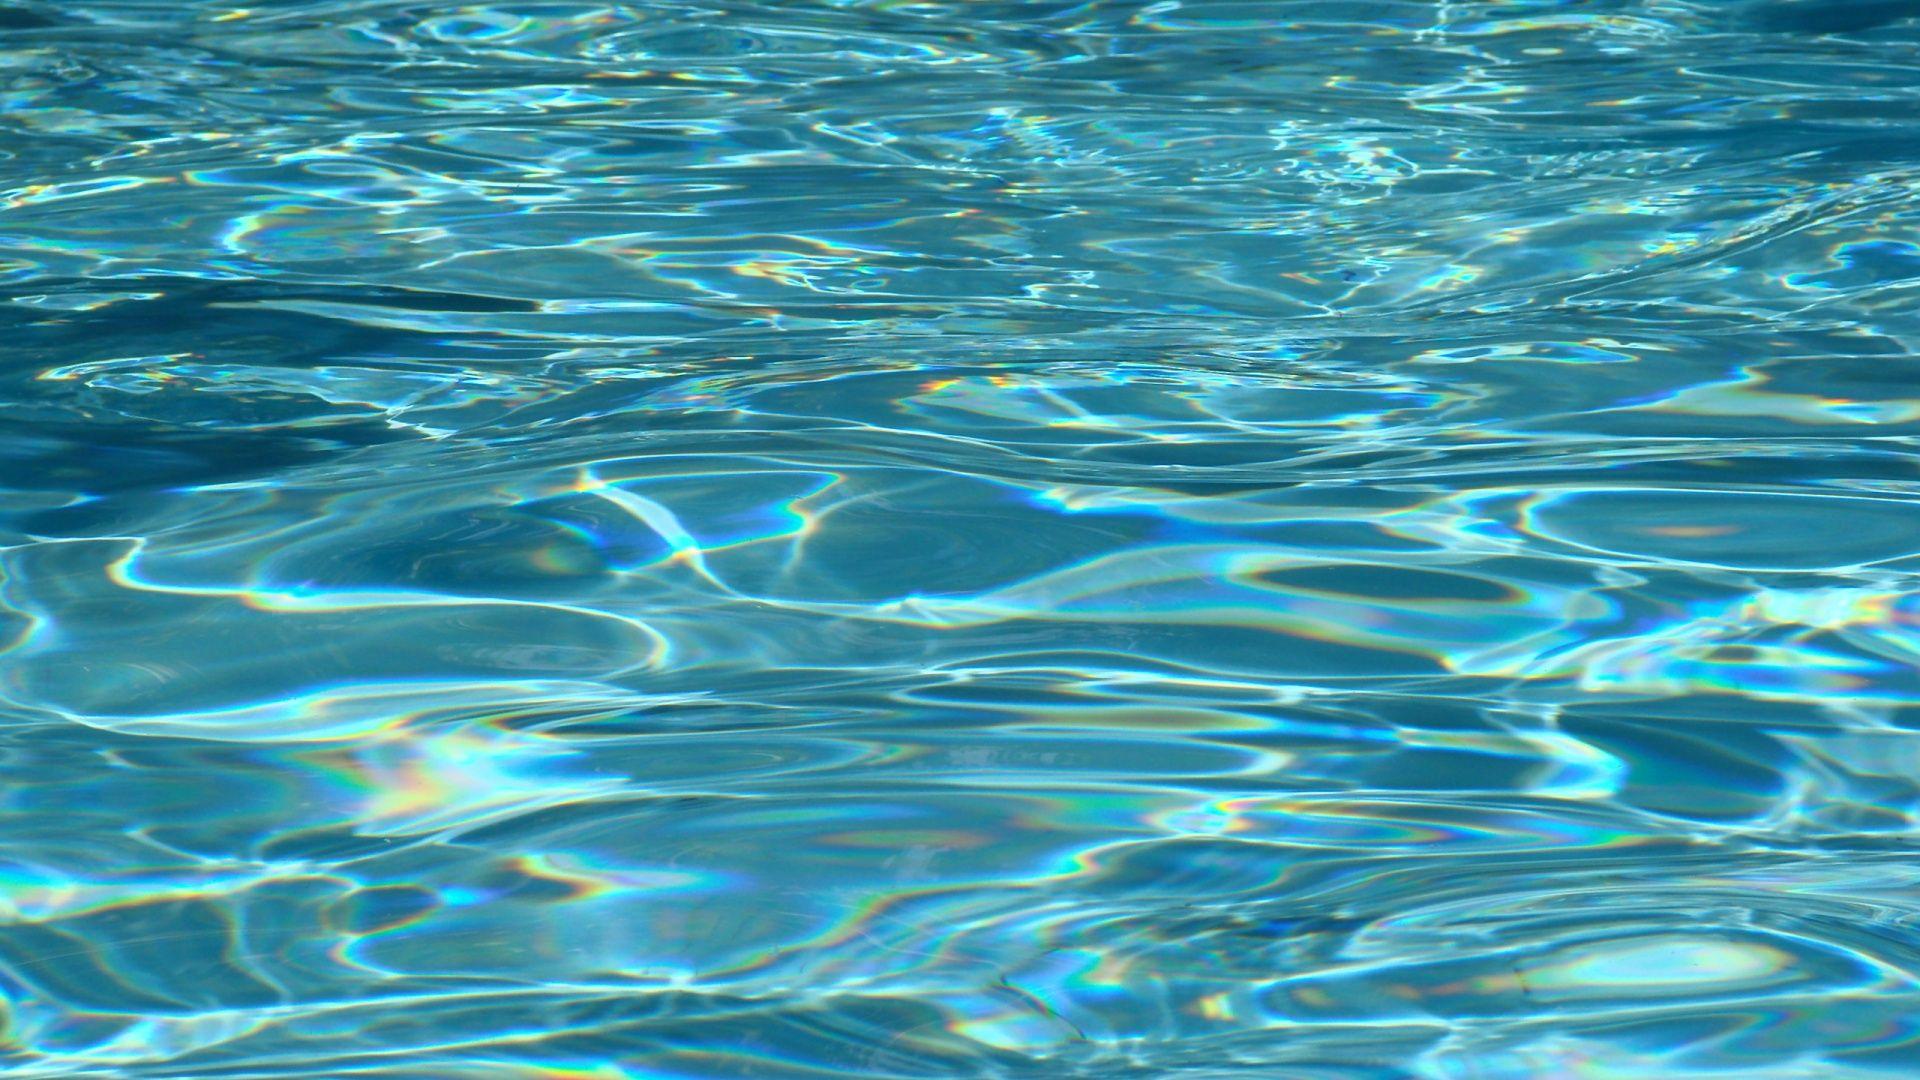 hd wallpapers 1920x1080 water